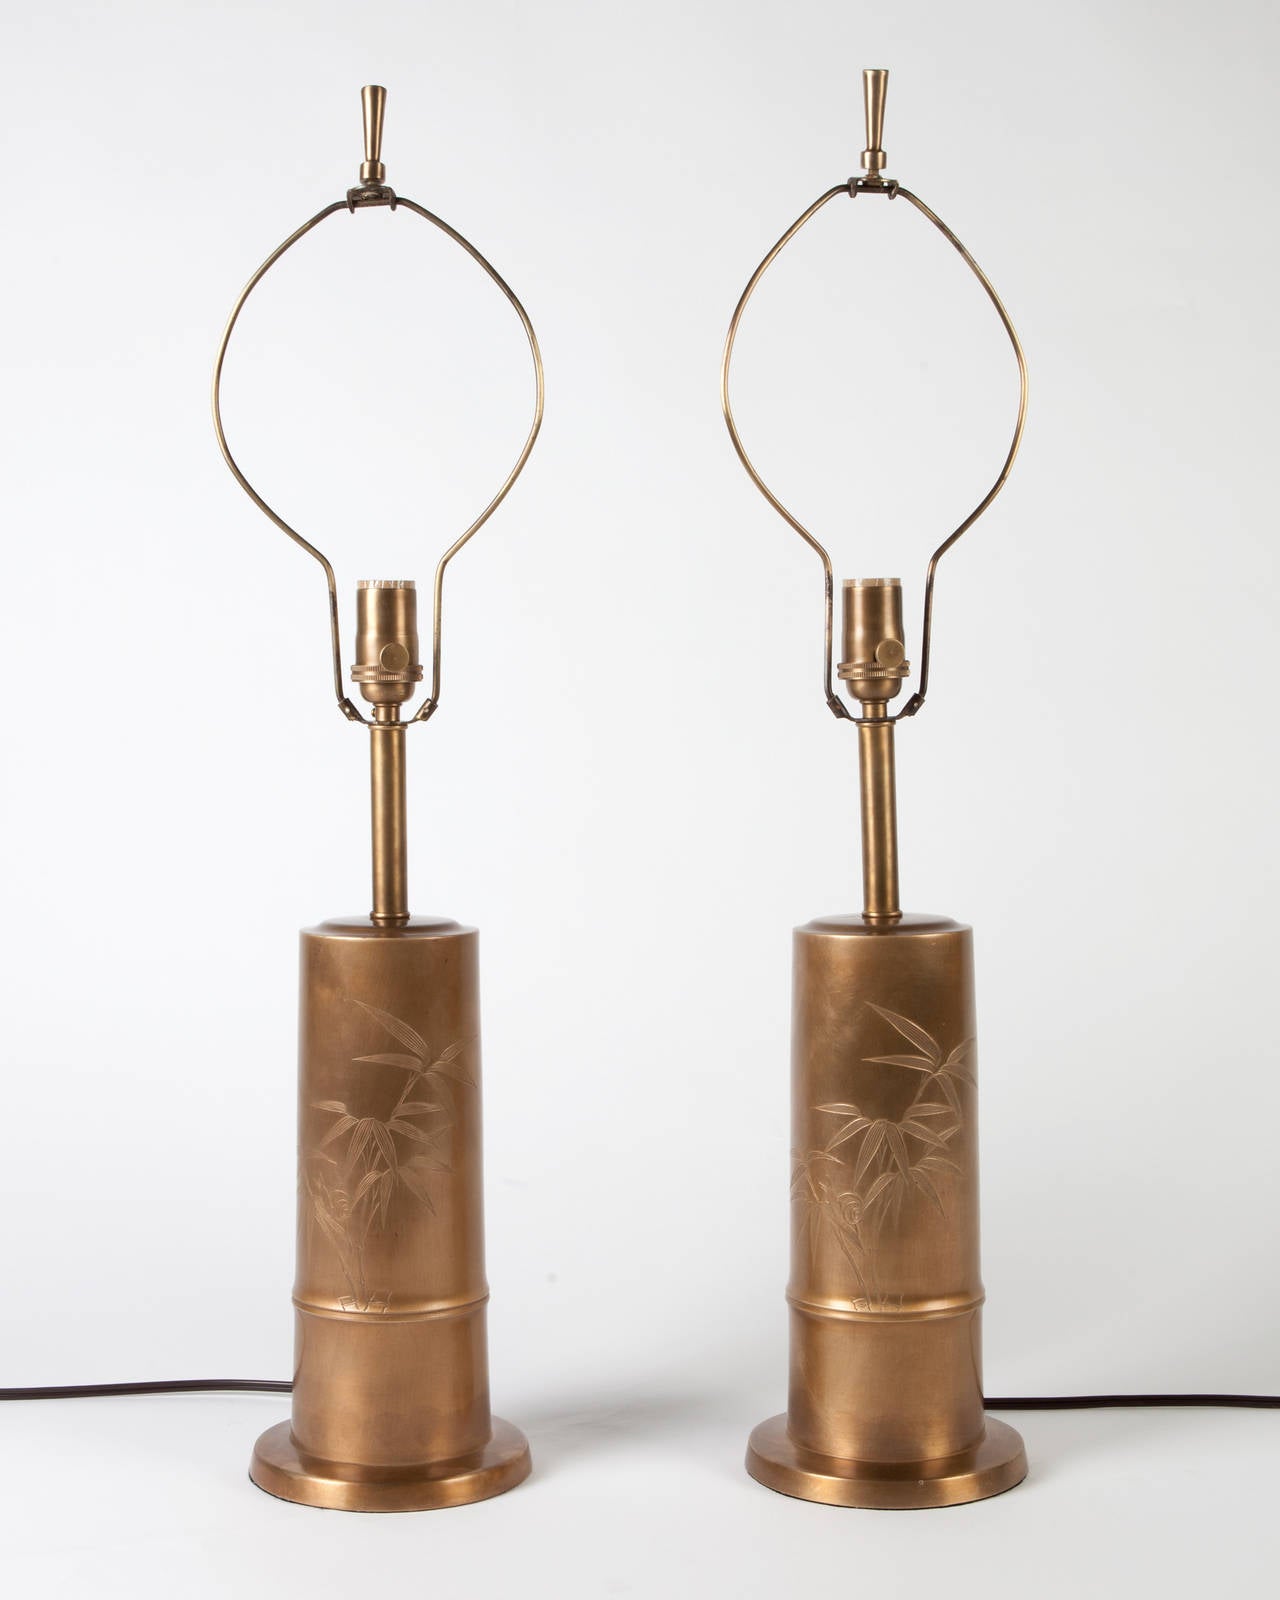 ATL1886

A pair of column-form lamps with an itaglio etching of a snail on bamboo leaves in a warm darkened brass finish.

Dimensions:
Overall: 28-1/2